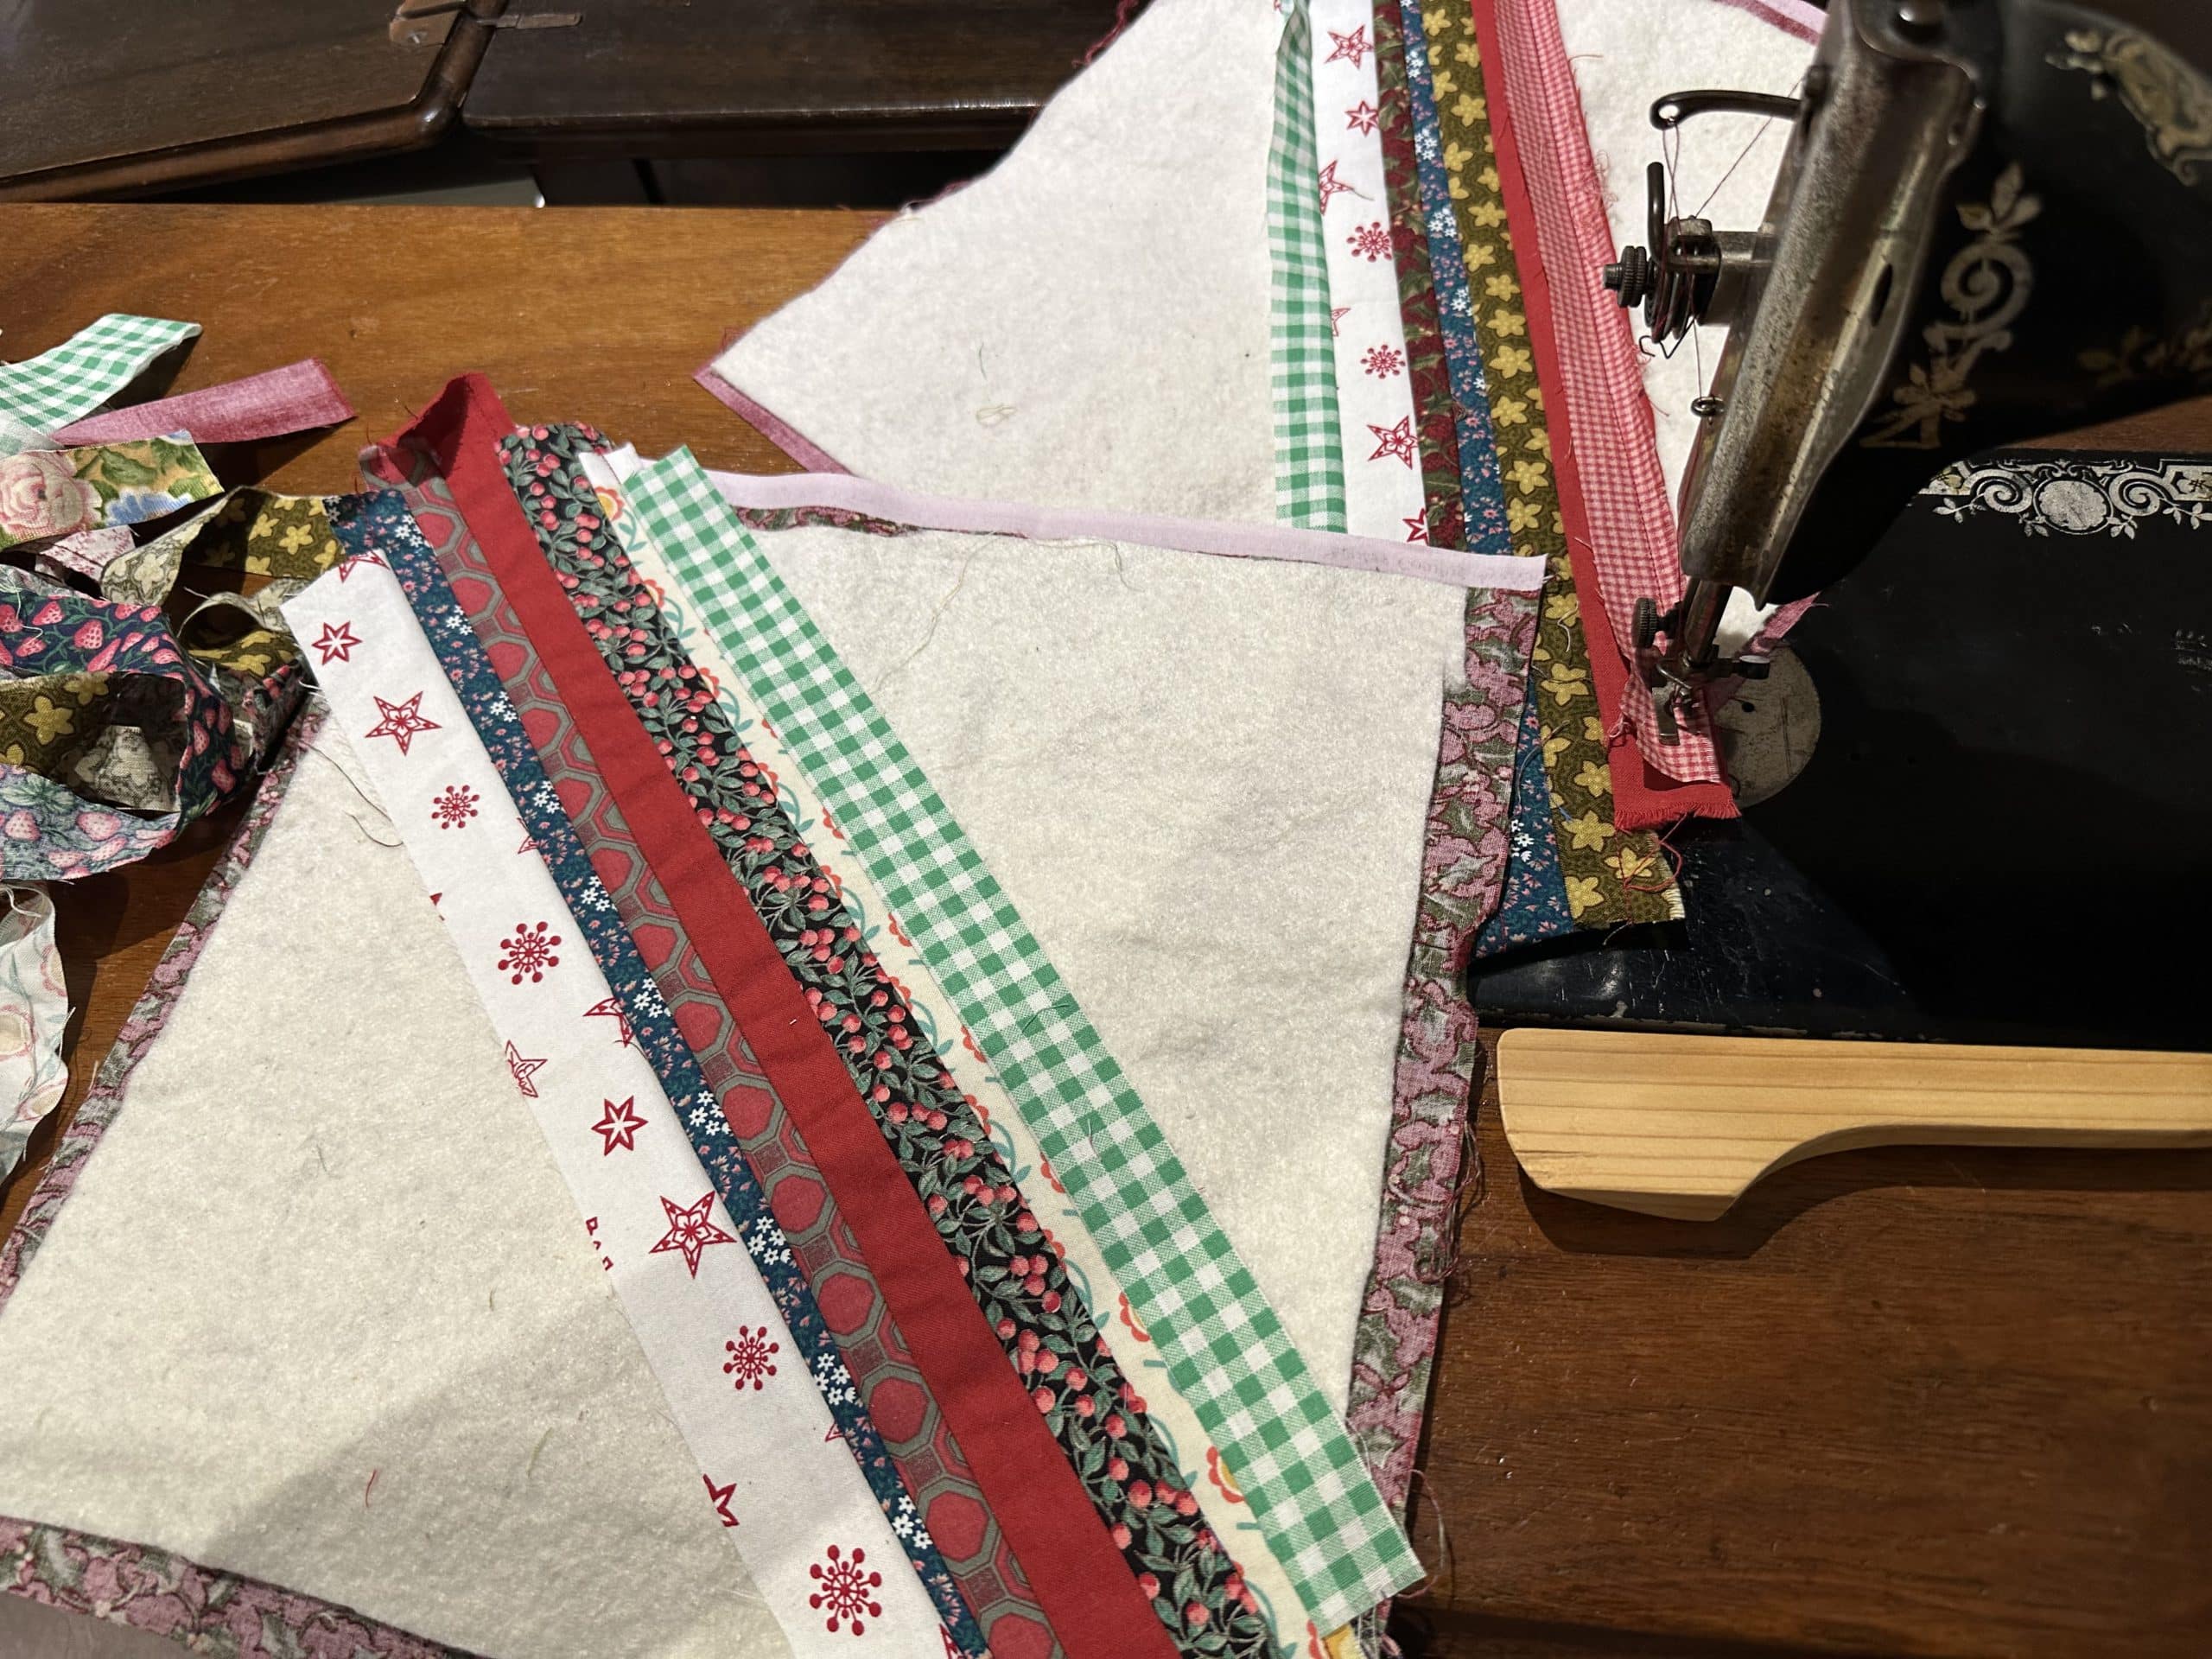 What is the best batting for a pot holder? - The Questioning Quilter